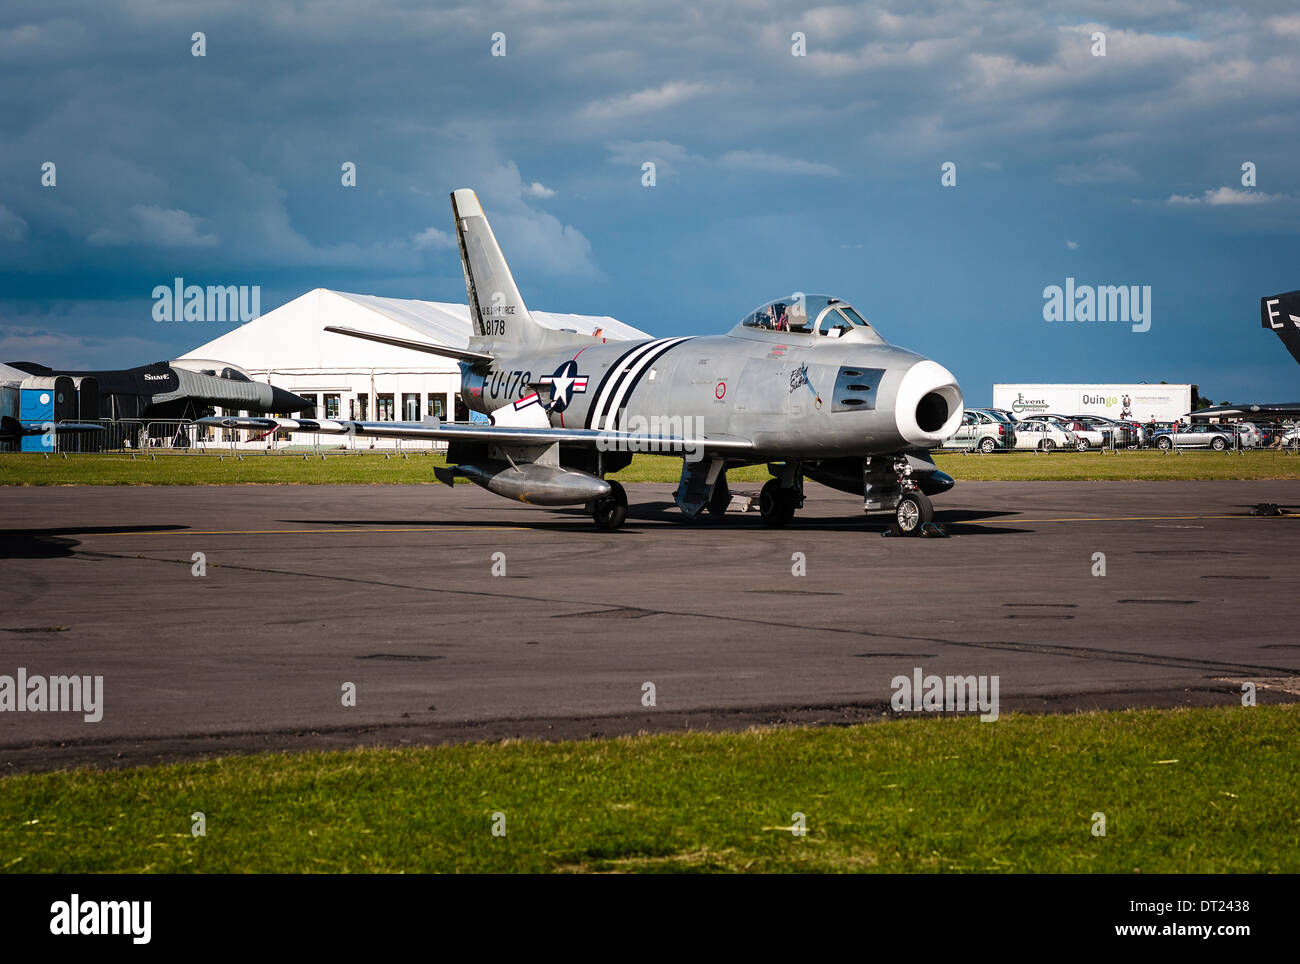 Restored ex-USAF Sabre jet fighter on public display at an Air Show in UK Stock Photo